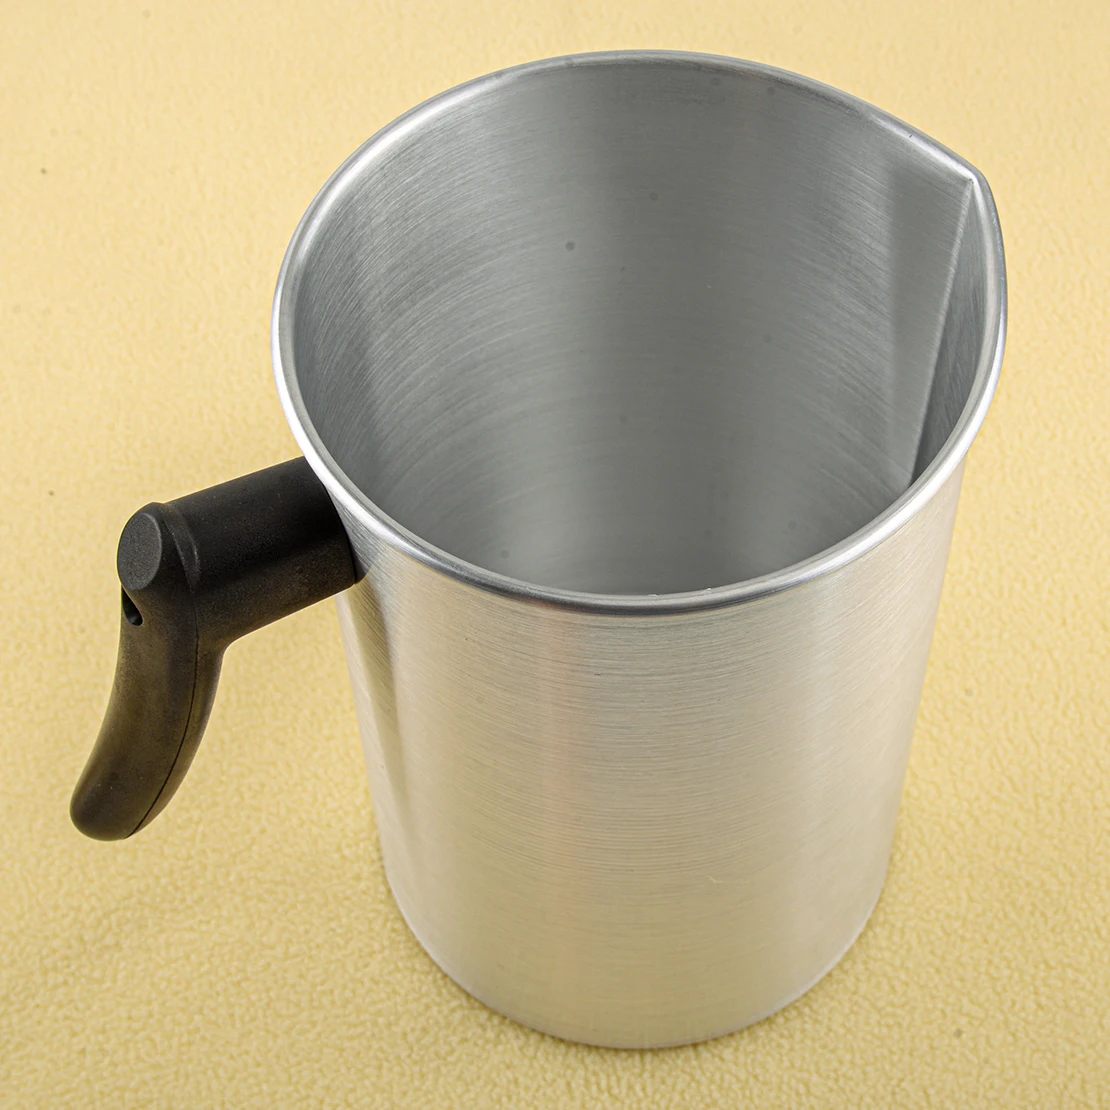 

Silver Aluminium Melting Pouring Pot DIY Cup Jug Pitcher for Craft Wax Lipstick Candle Soap Making 3L Watering Plants